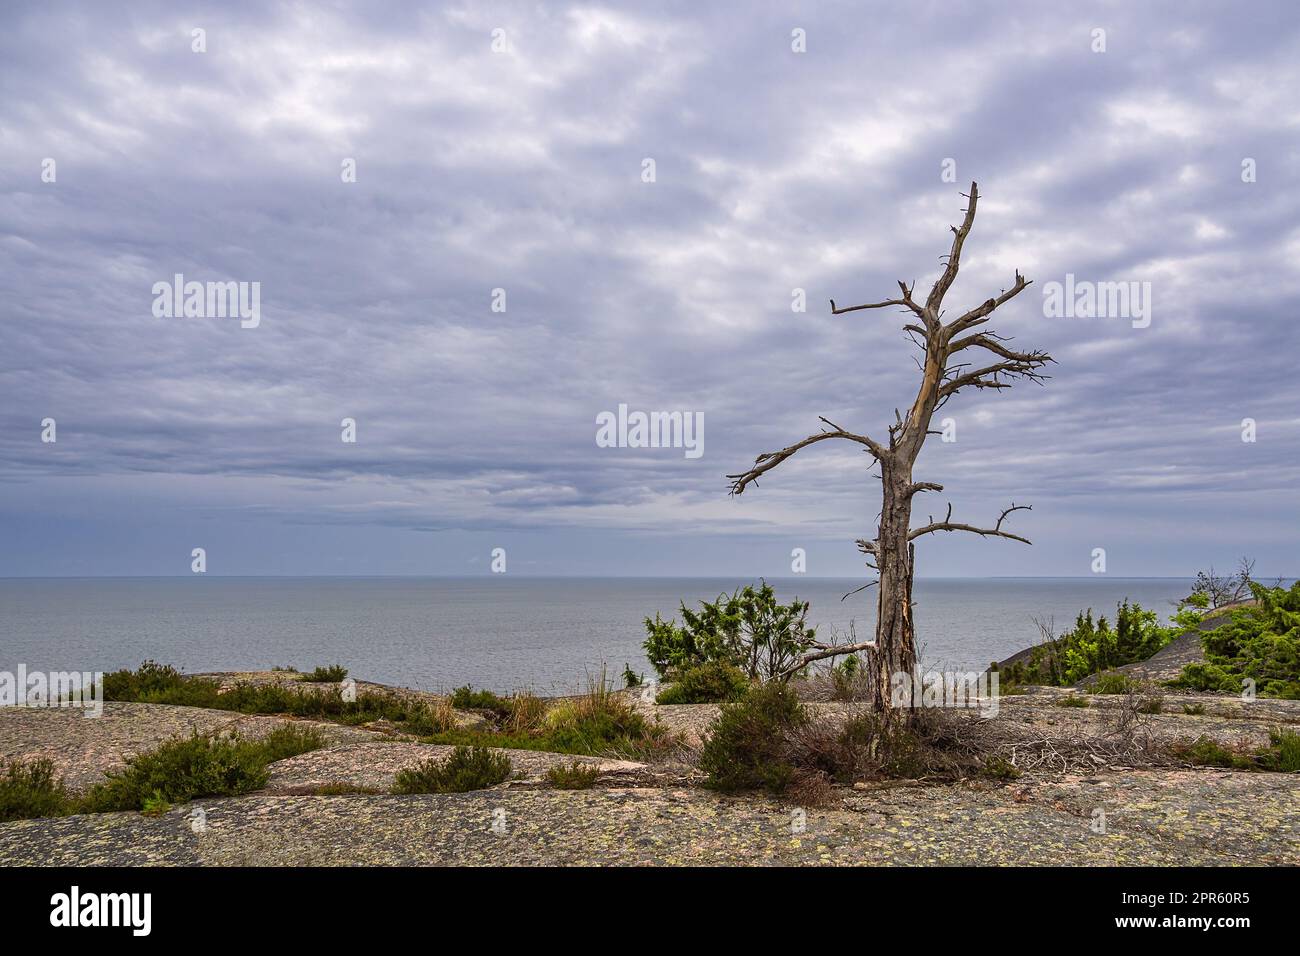 Landscape with rocks and tree on the island Blå Jungfrun in Sweden Stock Photo